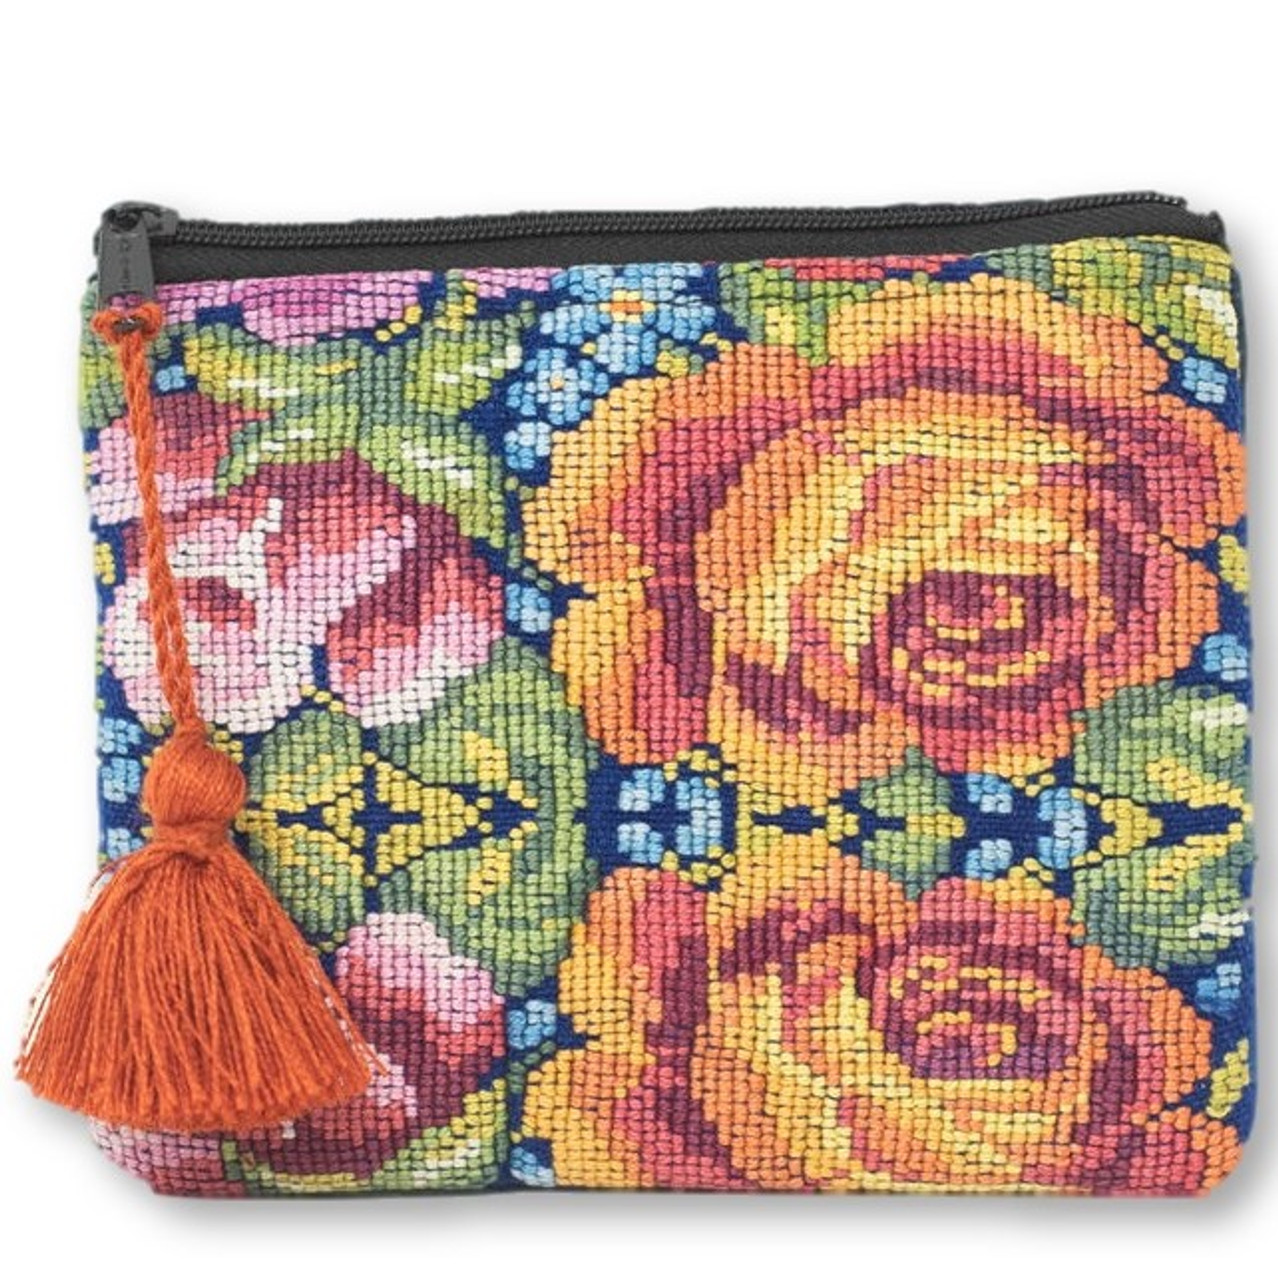 Upcycled Hand Woven Zip Purse from Guatemala, Made from a Traditional Blouse "Huipil" and Skirt "Corte" 7.5" x 5.5" with Tassel